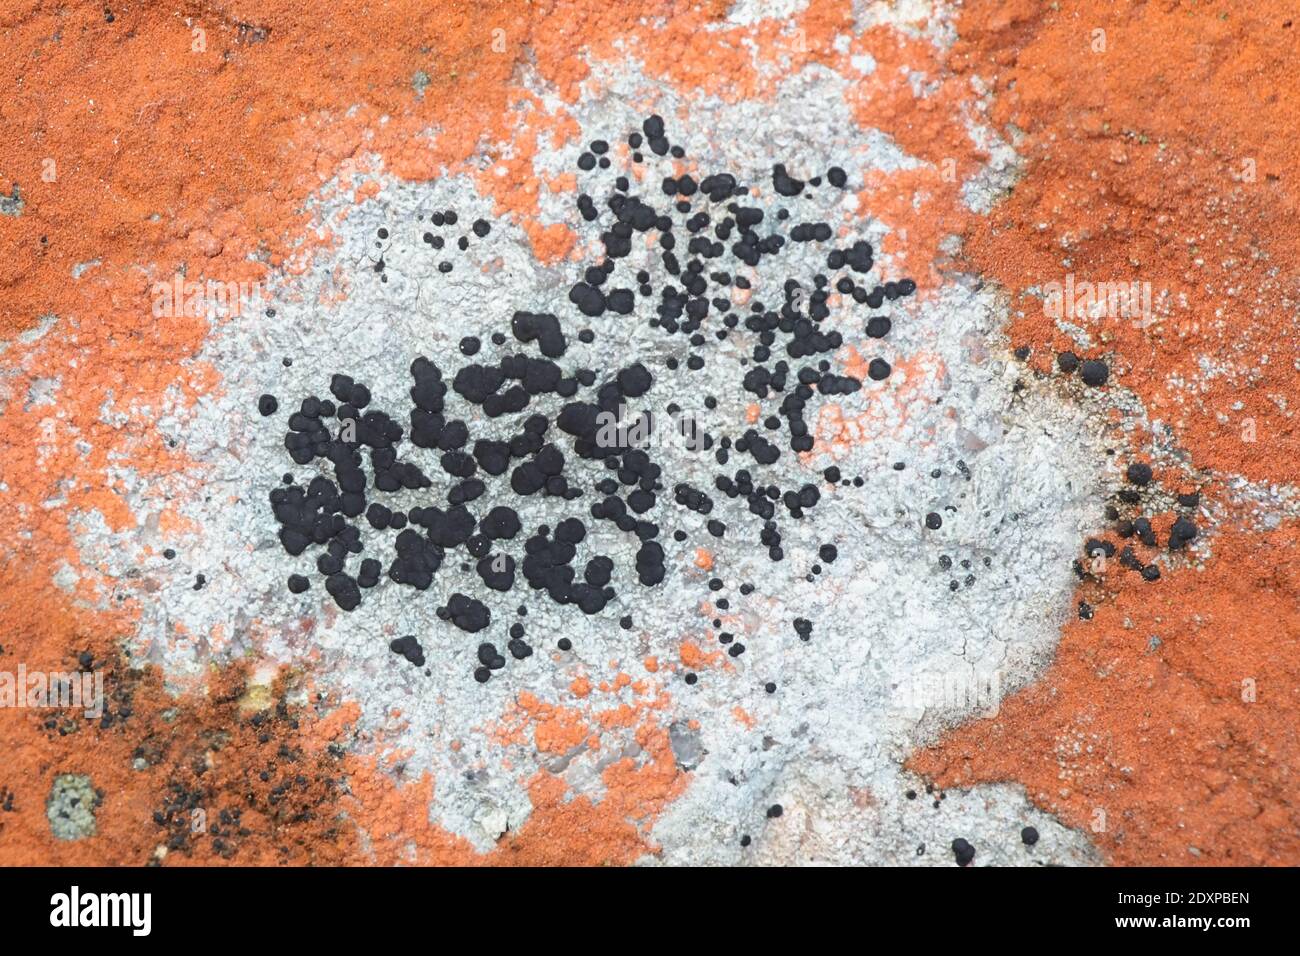 Rhizocarpons or map lichens are considered the oldest living organism on Earth, age-estimated at 8,600 years.  Specimen from Finland Stock Photo